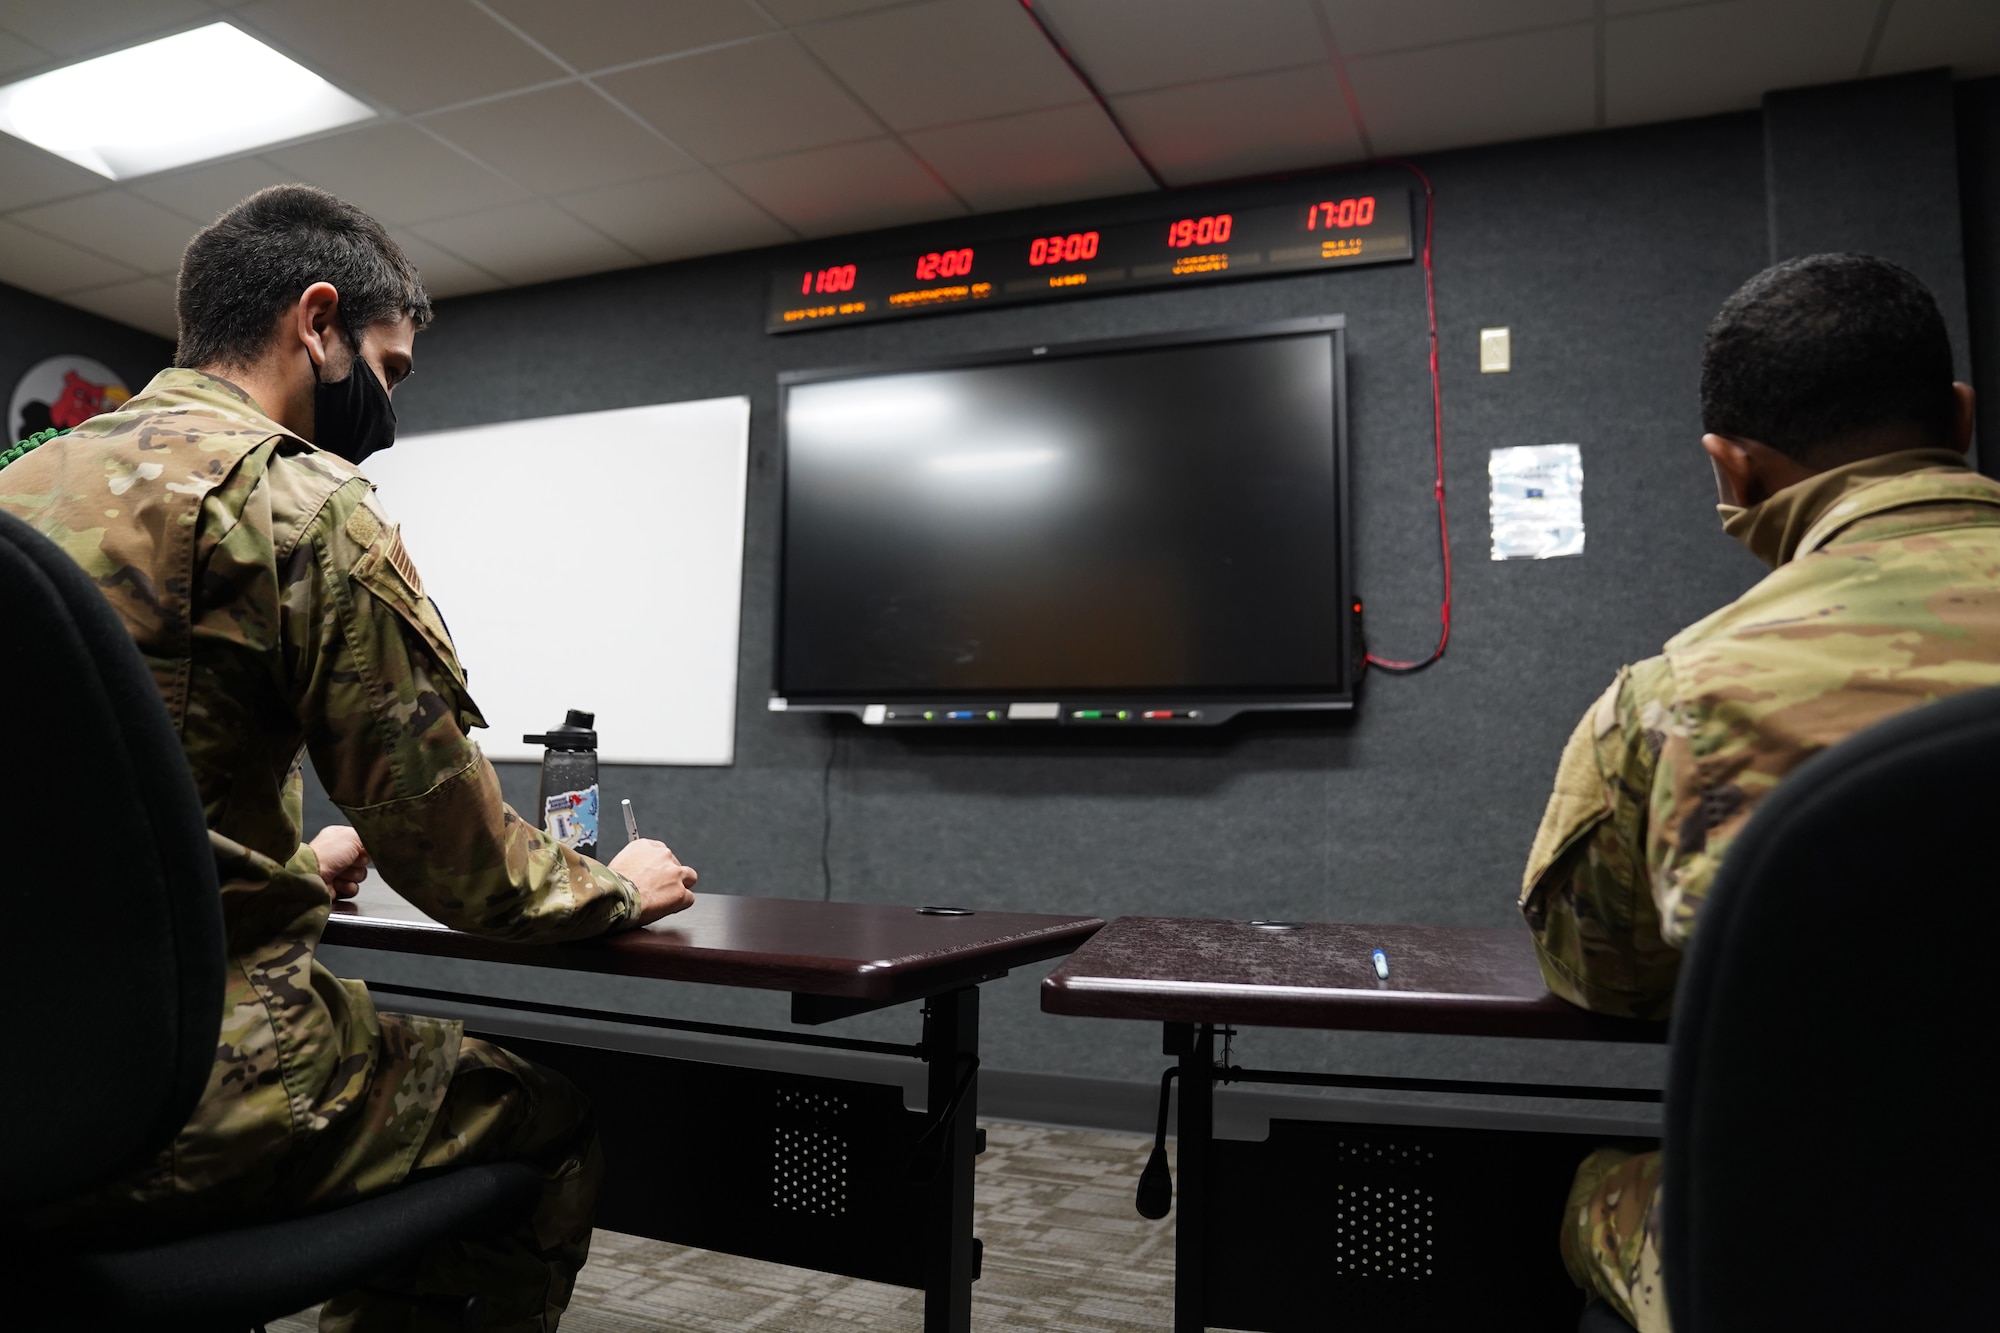 334th Training Squadron students attend a command post operations class inside a classroom dedicated to Master Sgt. Desiree McIntyre, 403rd Wing command and control technician, located in Cody Hall at Keesler Air Force Base, Mississippi, Feb. 25, 2021. McIntyre dedicated 30 years to the command post career field, providing instrumental training techniques and developing the training curriculum. (U.S. Air Force photo by Senior Airman Seth Haddix)